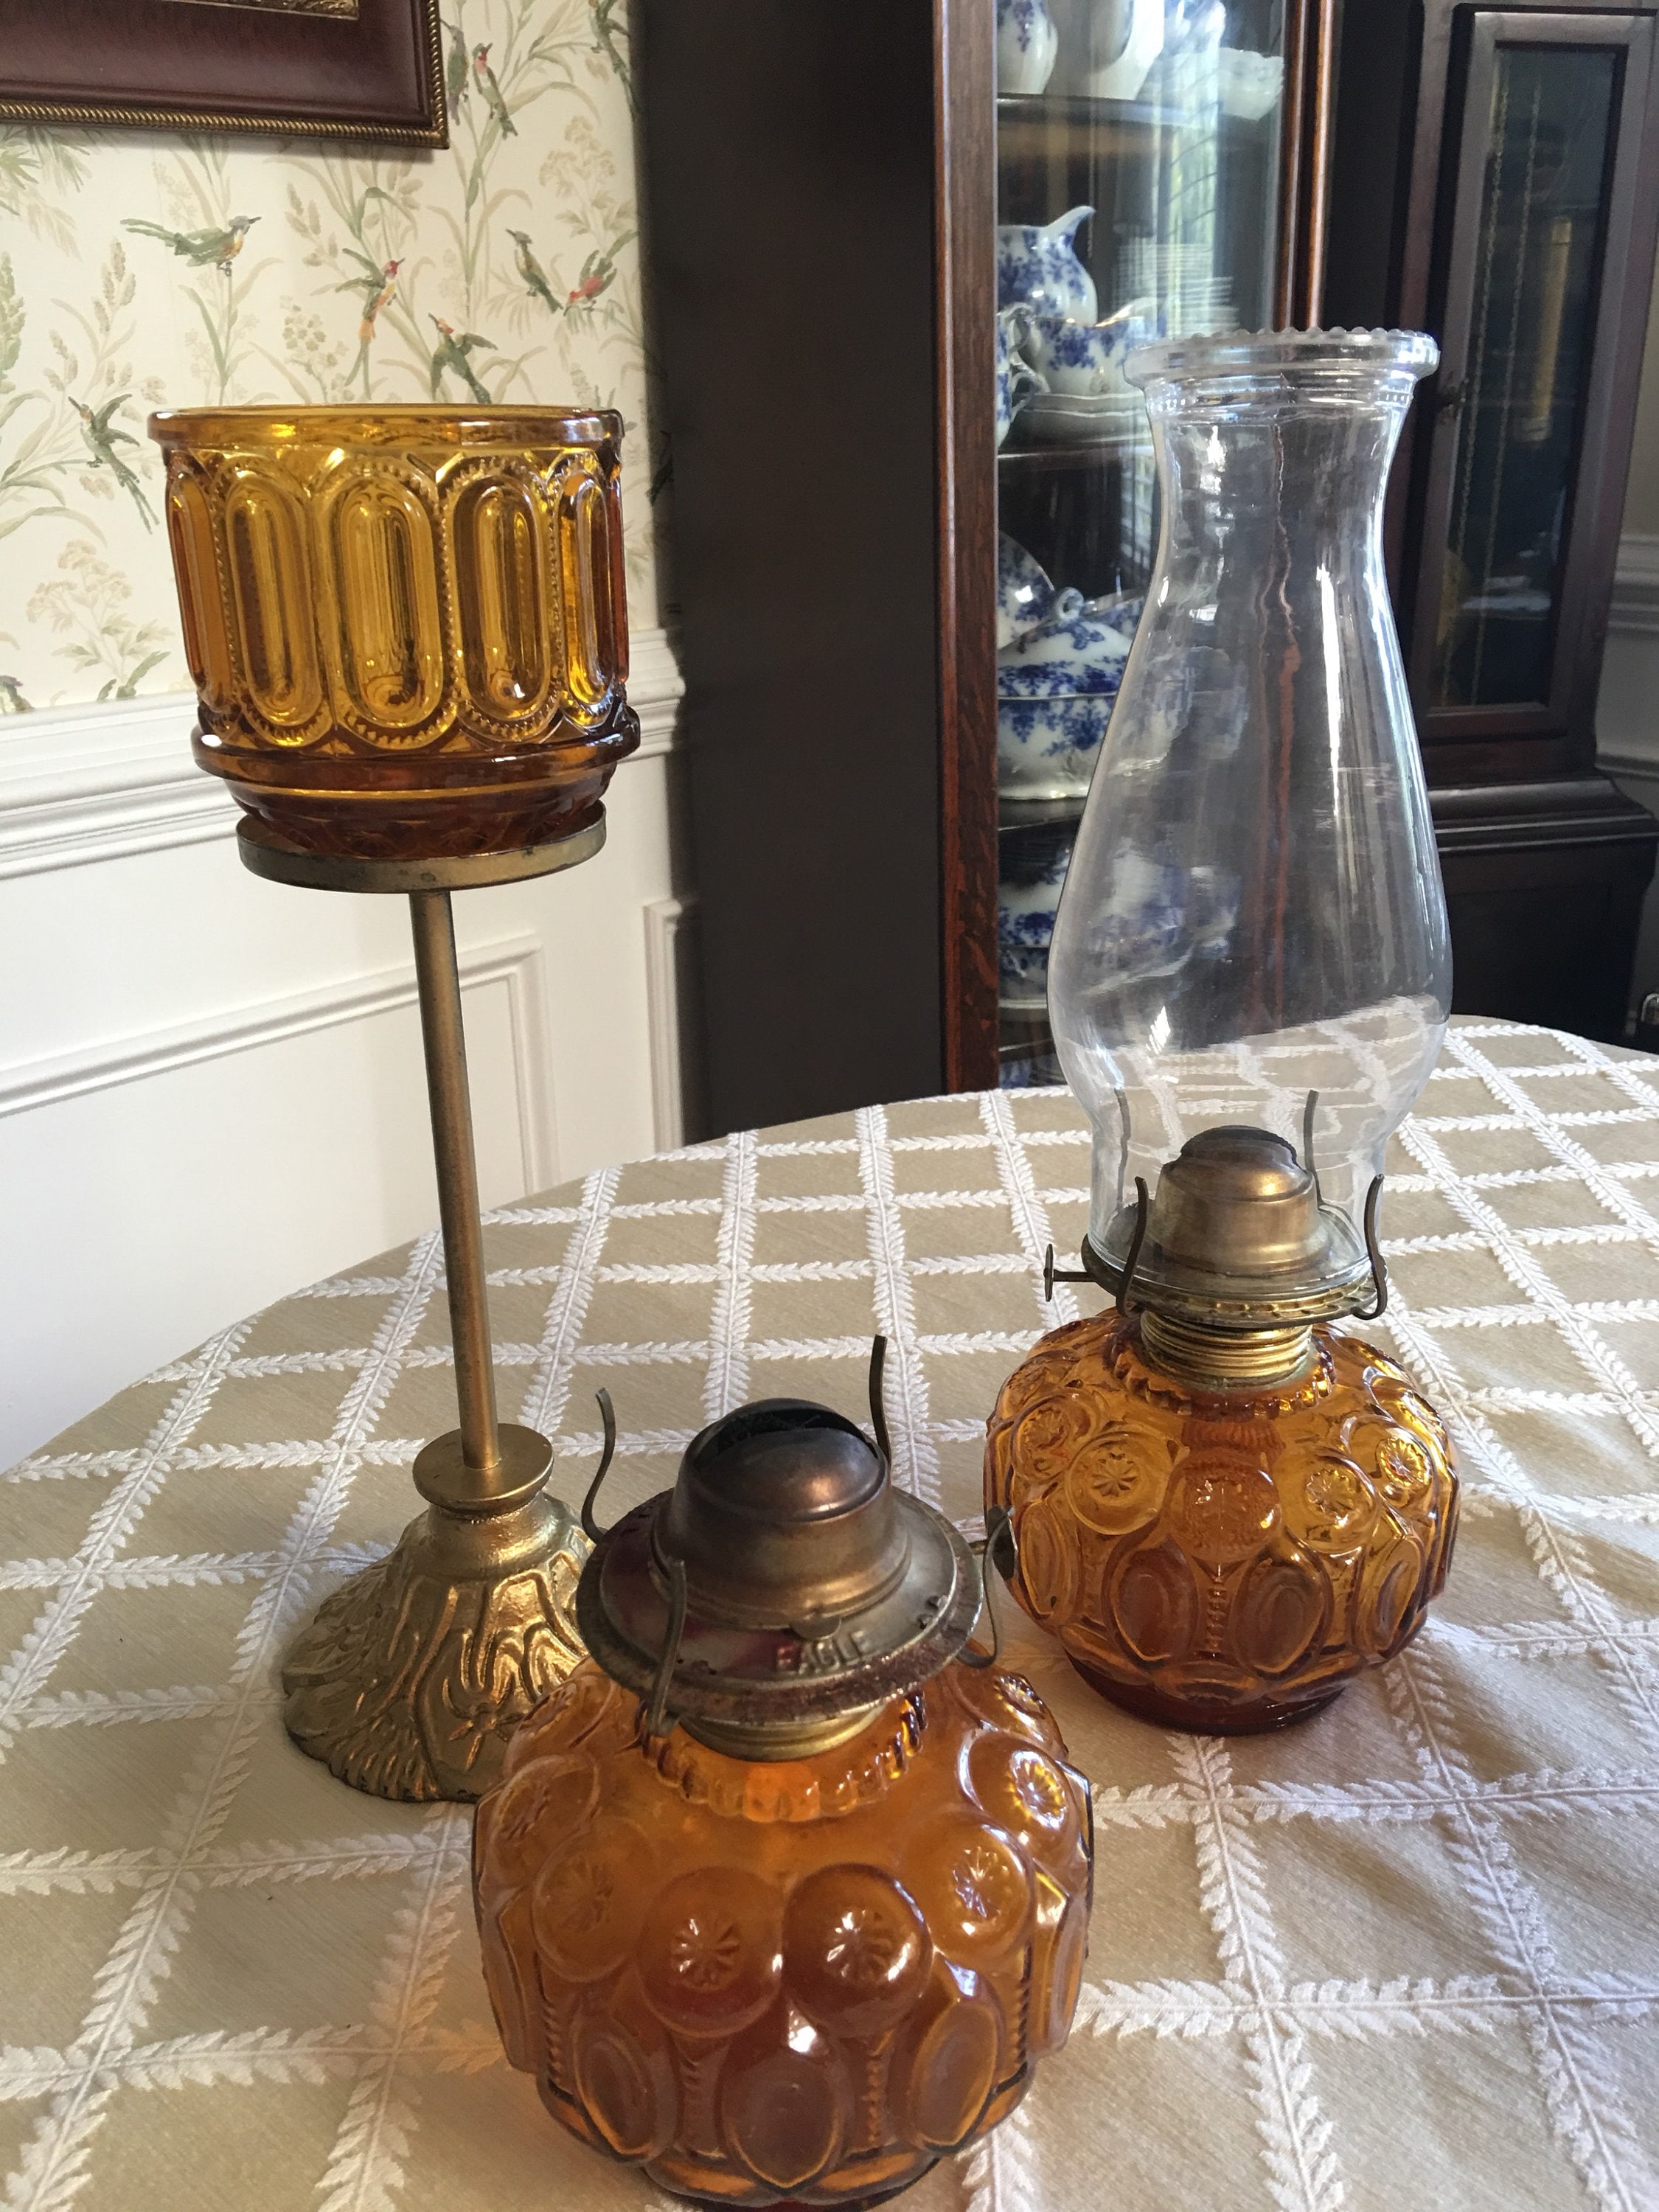 Vintage Amber Glass & Brass Small Hurricane Lamp Antique Kerosene Oil -  Small Brown Light Collectible Home Decor Circa early 1900s